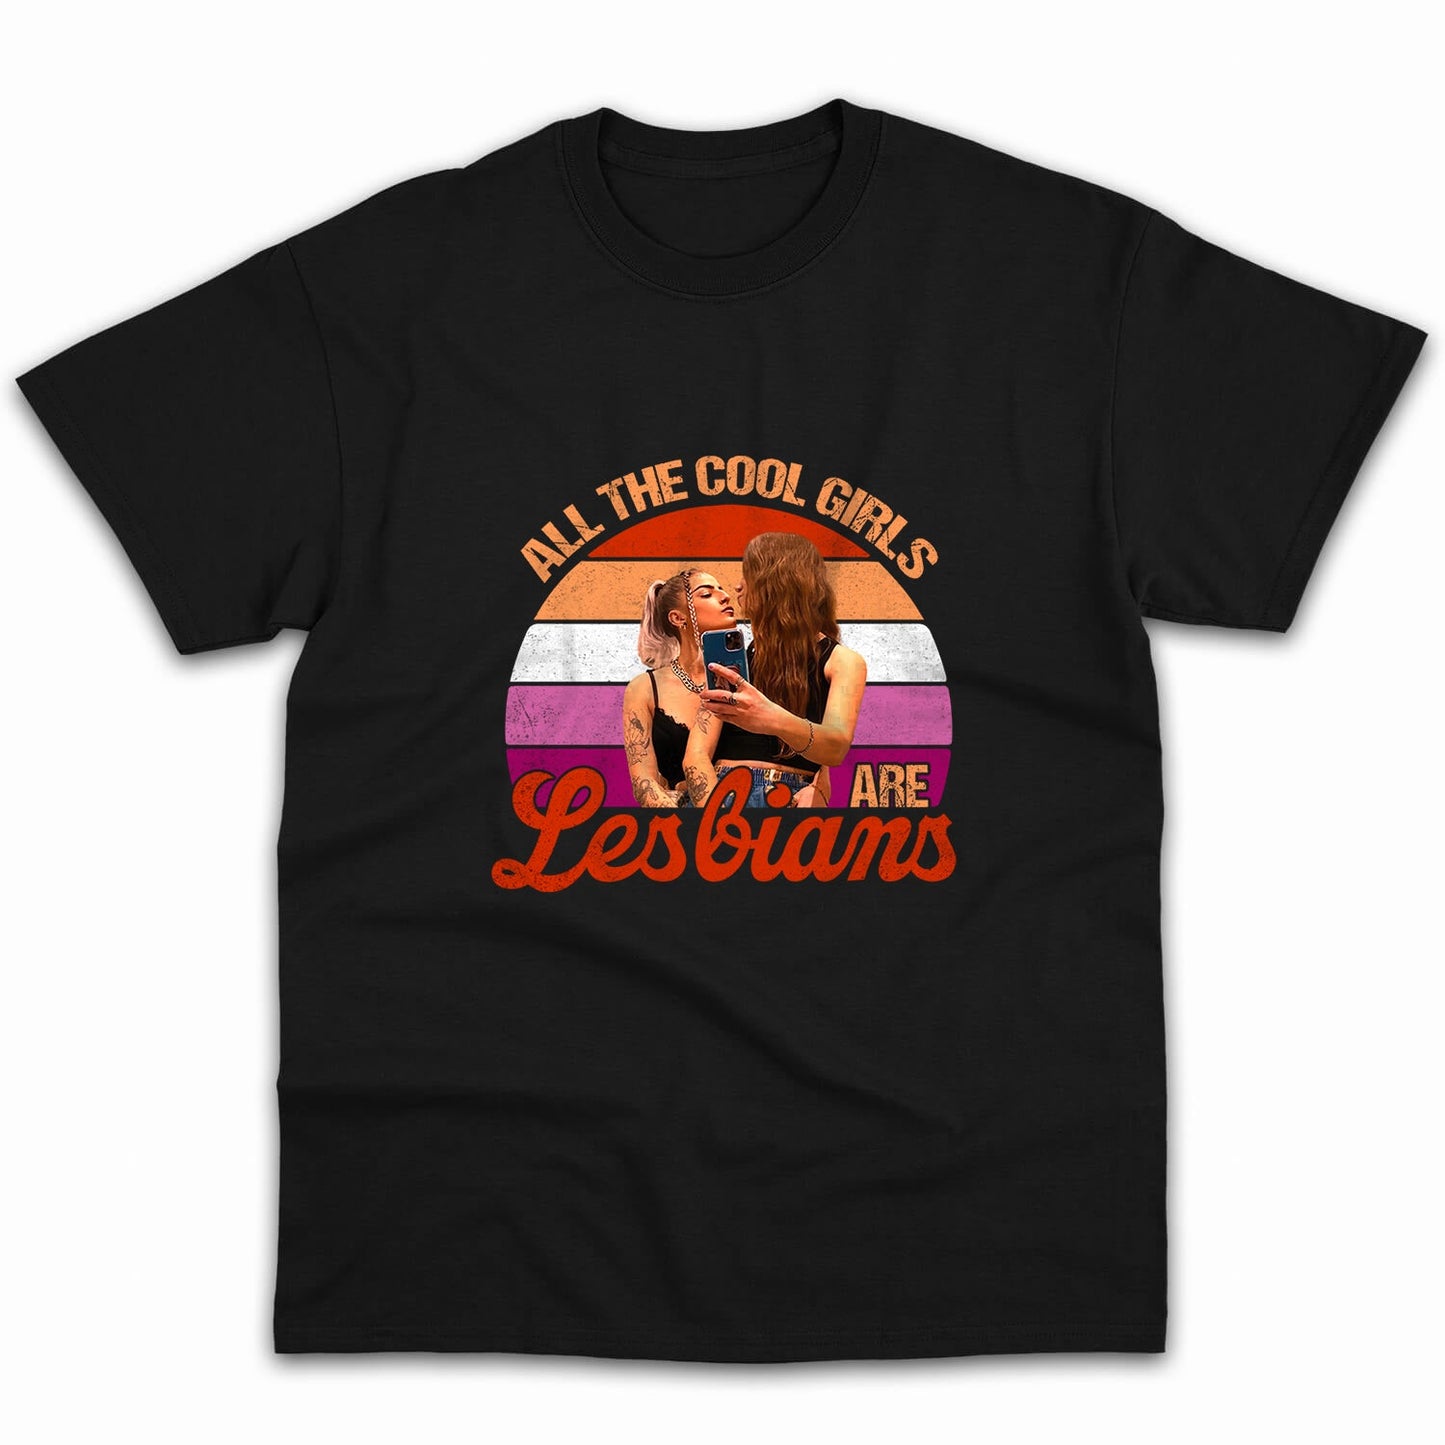 All The Cool Girls Are Lesbian - Personalized Anniversary or Valentine's Day gift for Lesbian Couple - Custom Tshirt - MyMindfulGifts